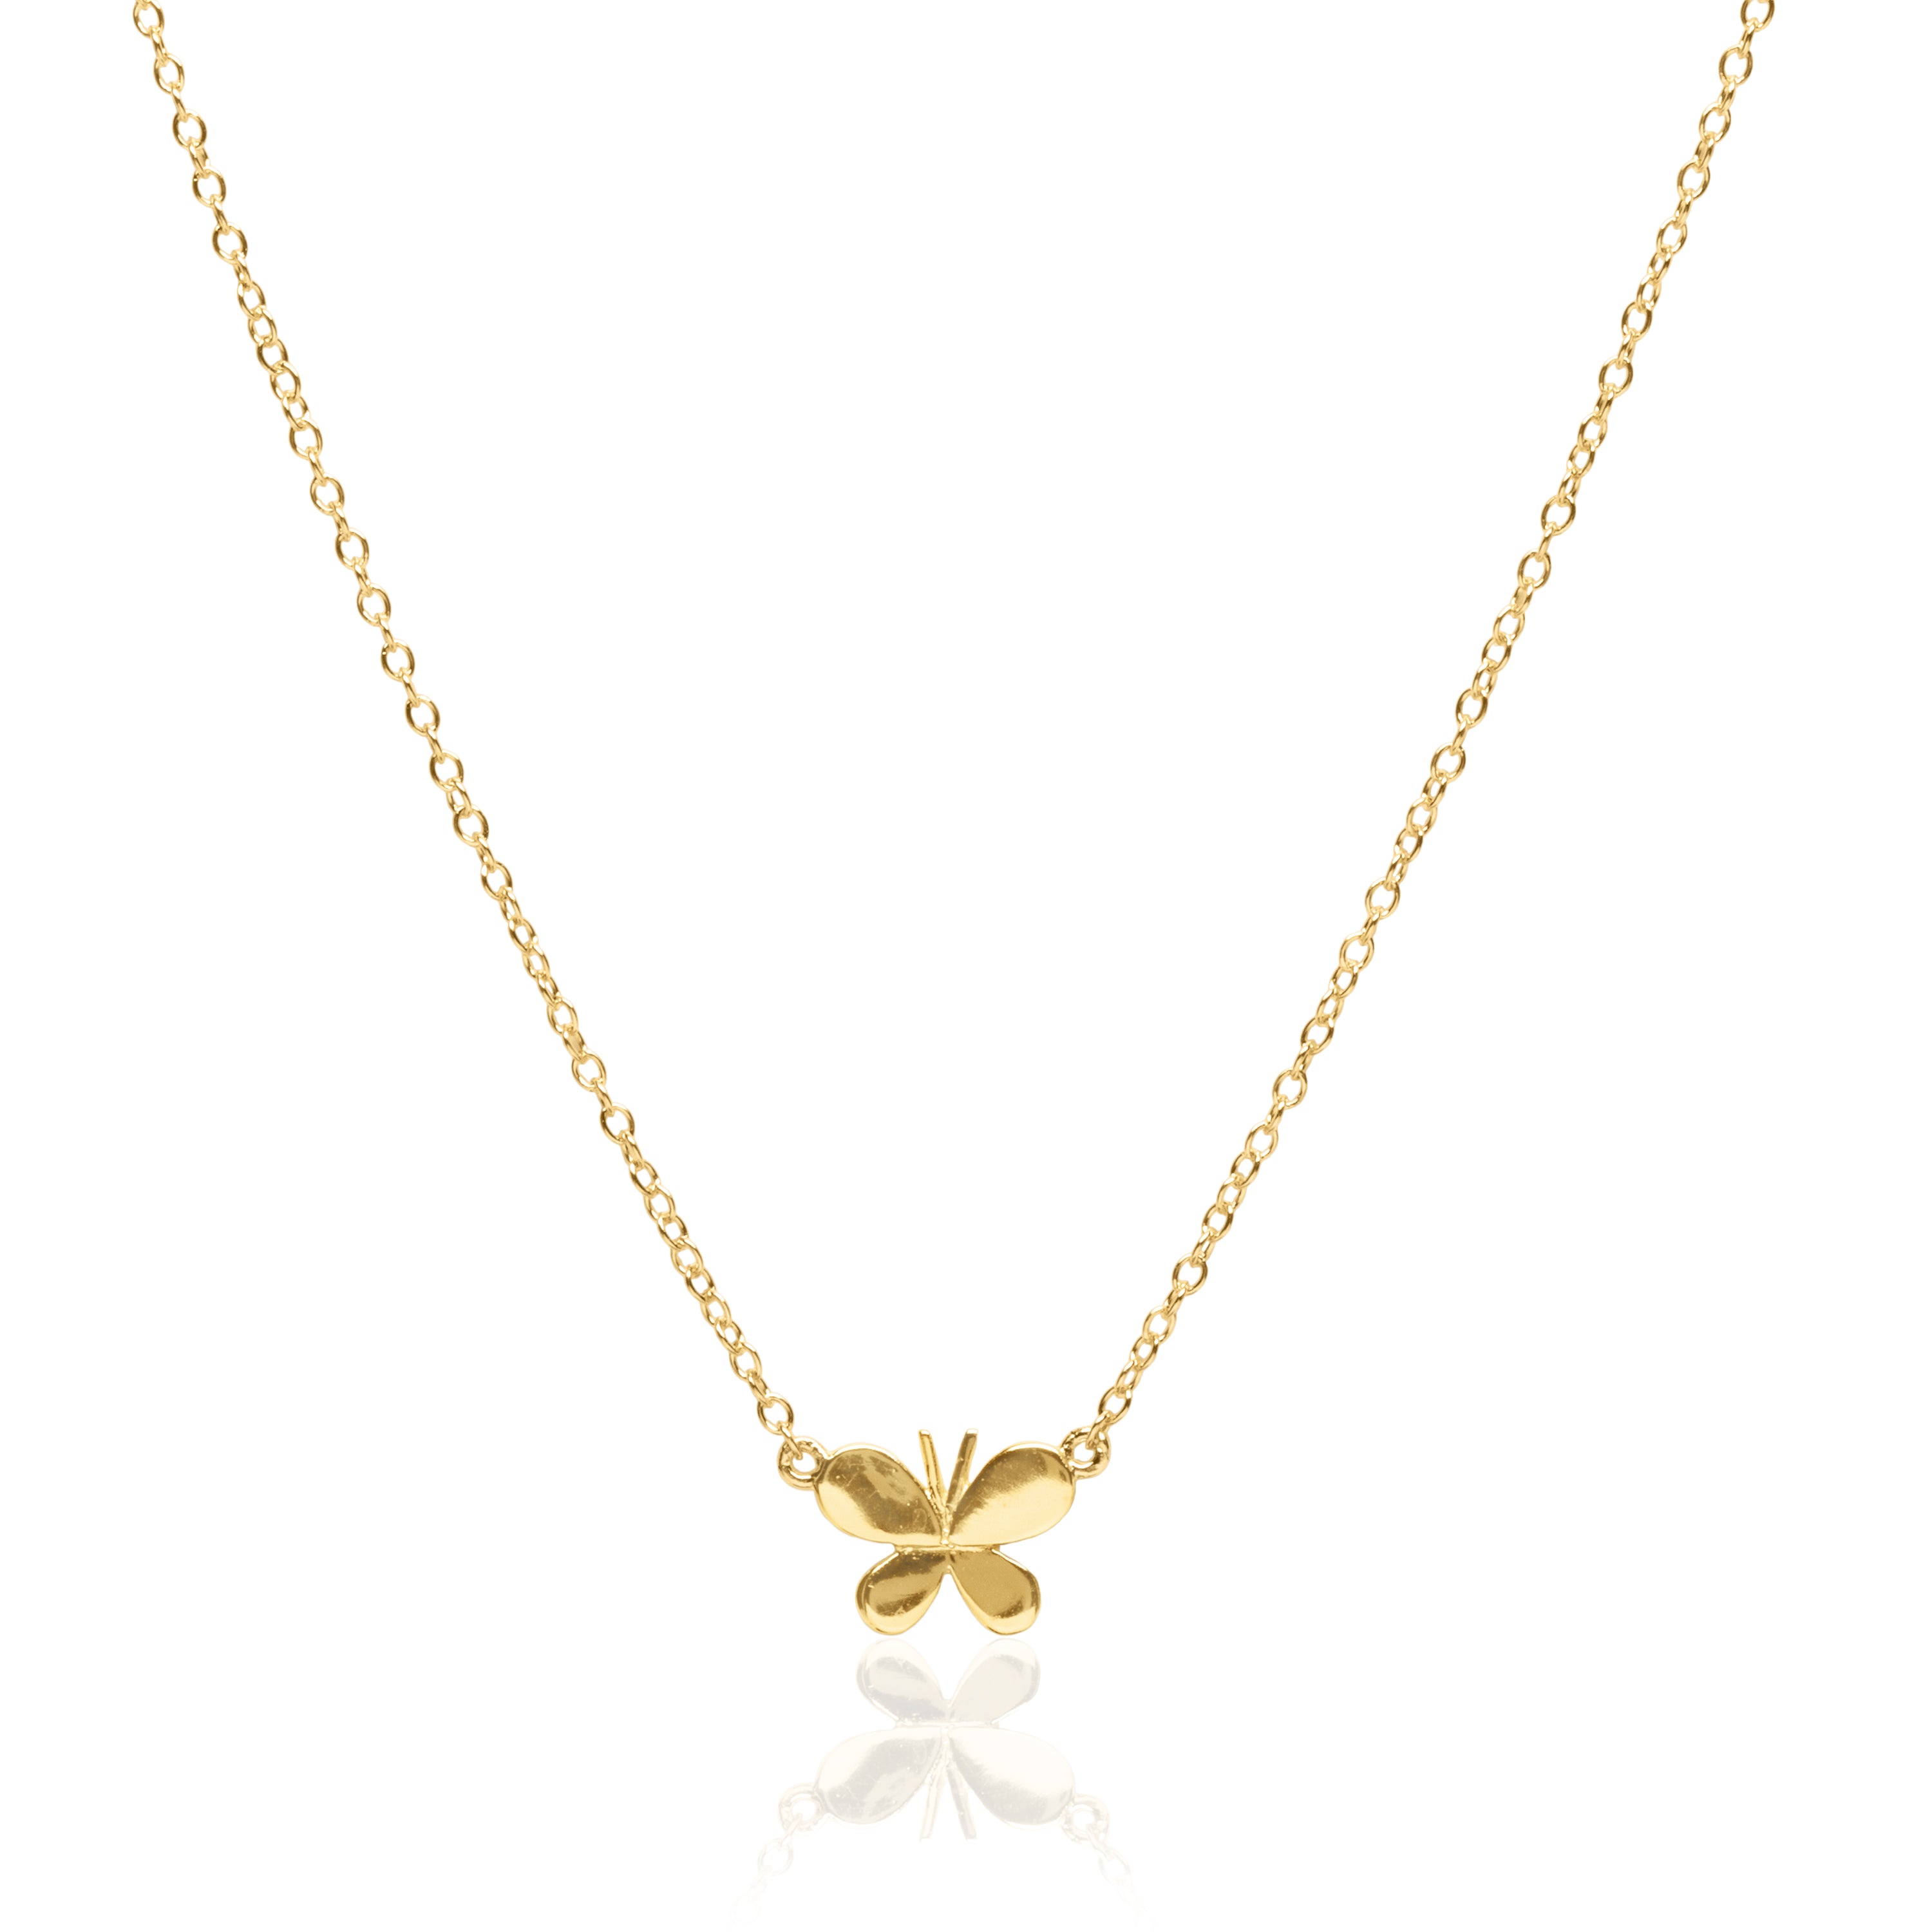 Butterfly Charm Necklace – The Panda Storee